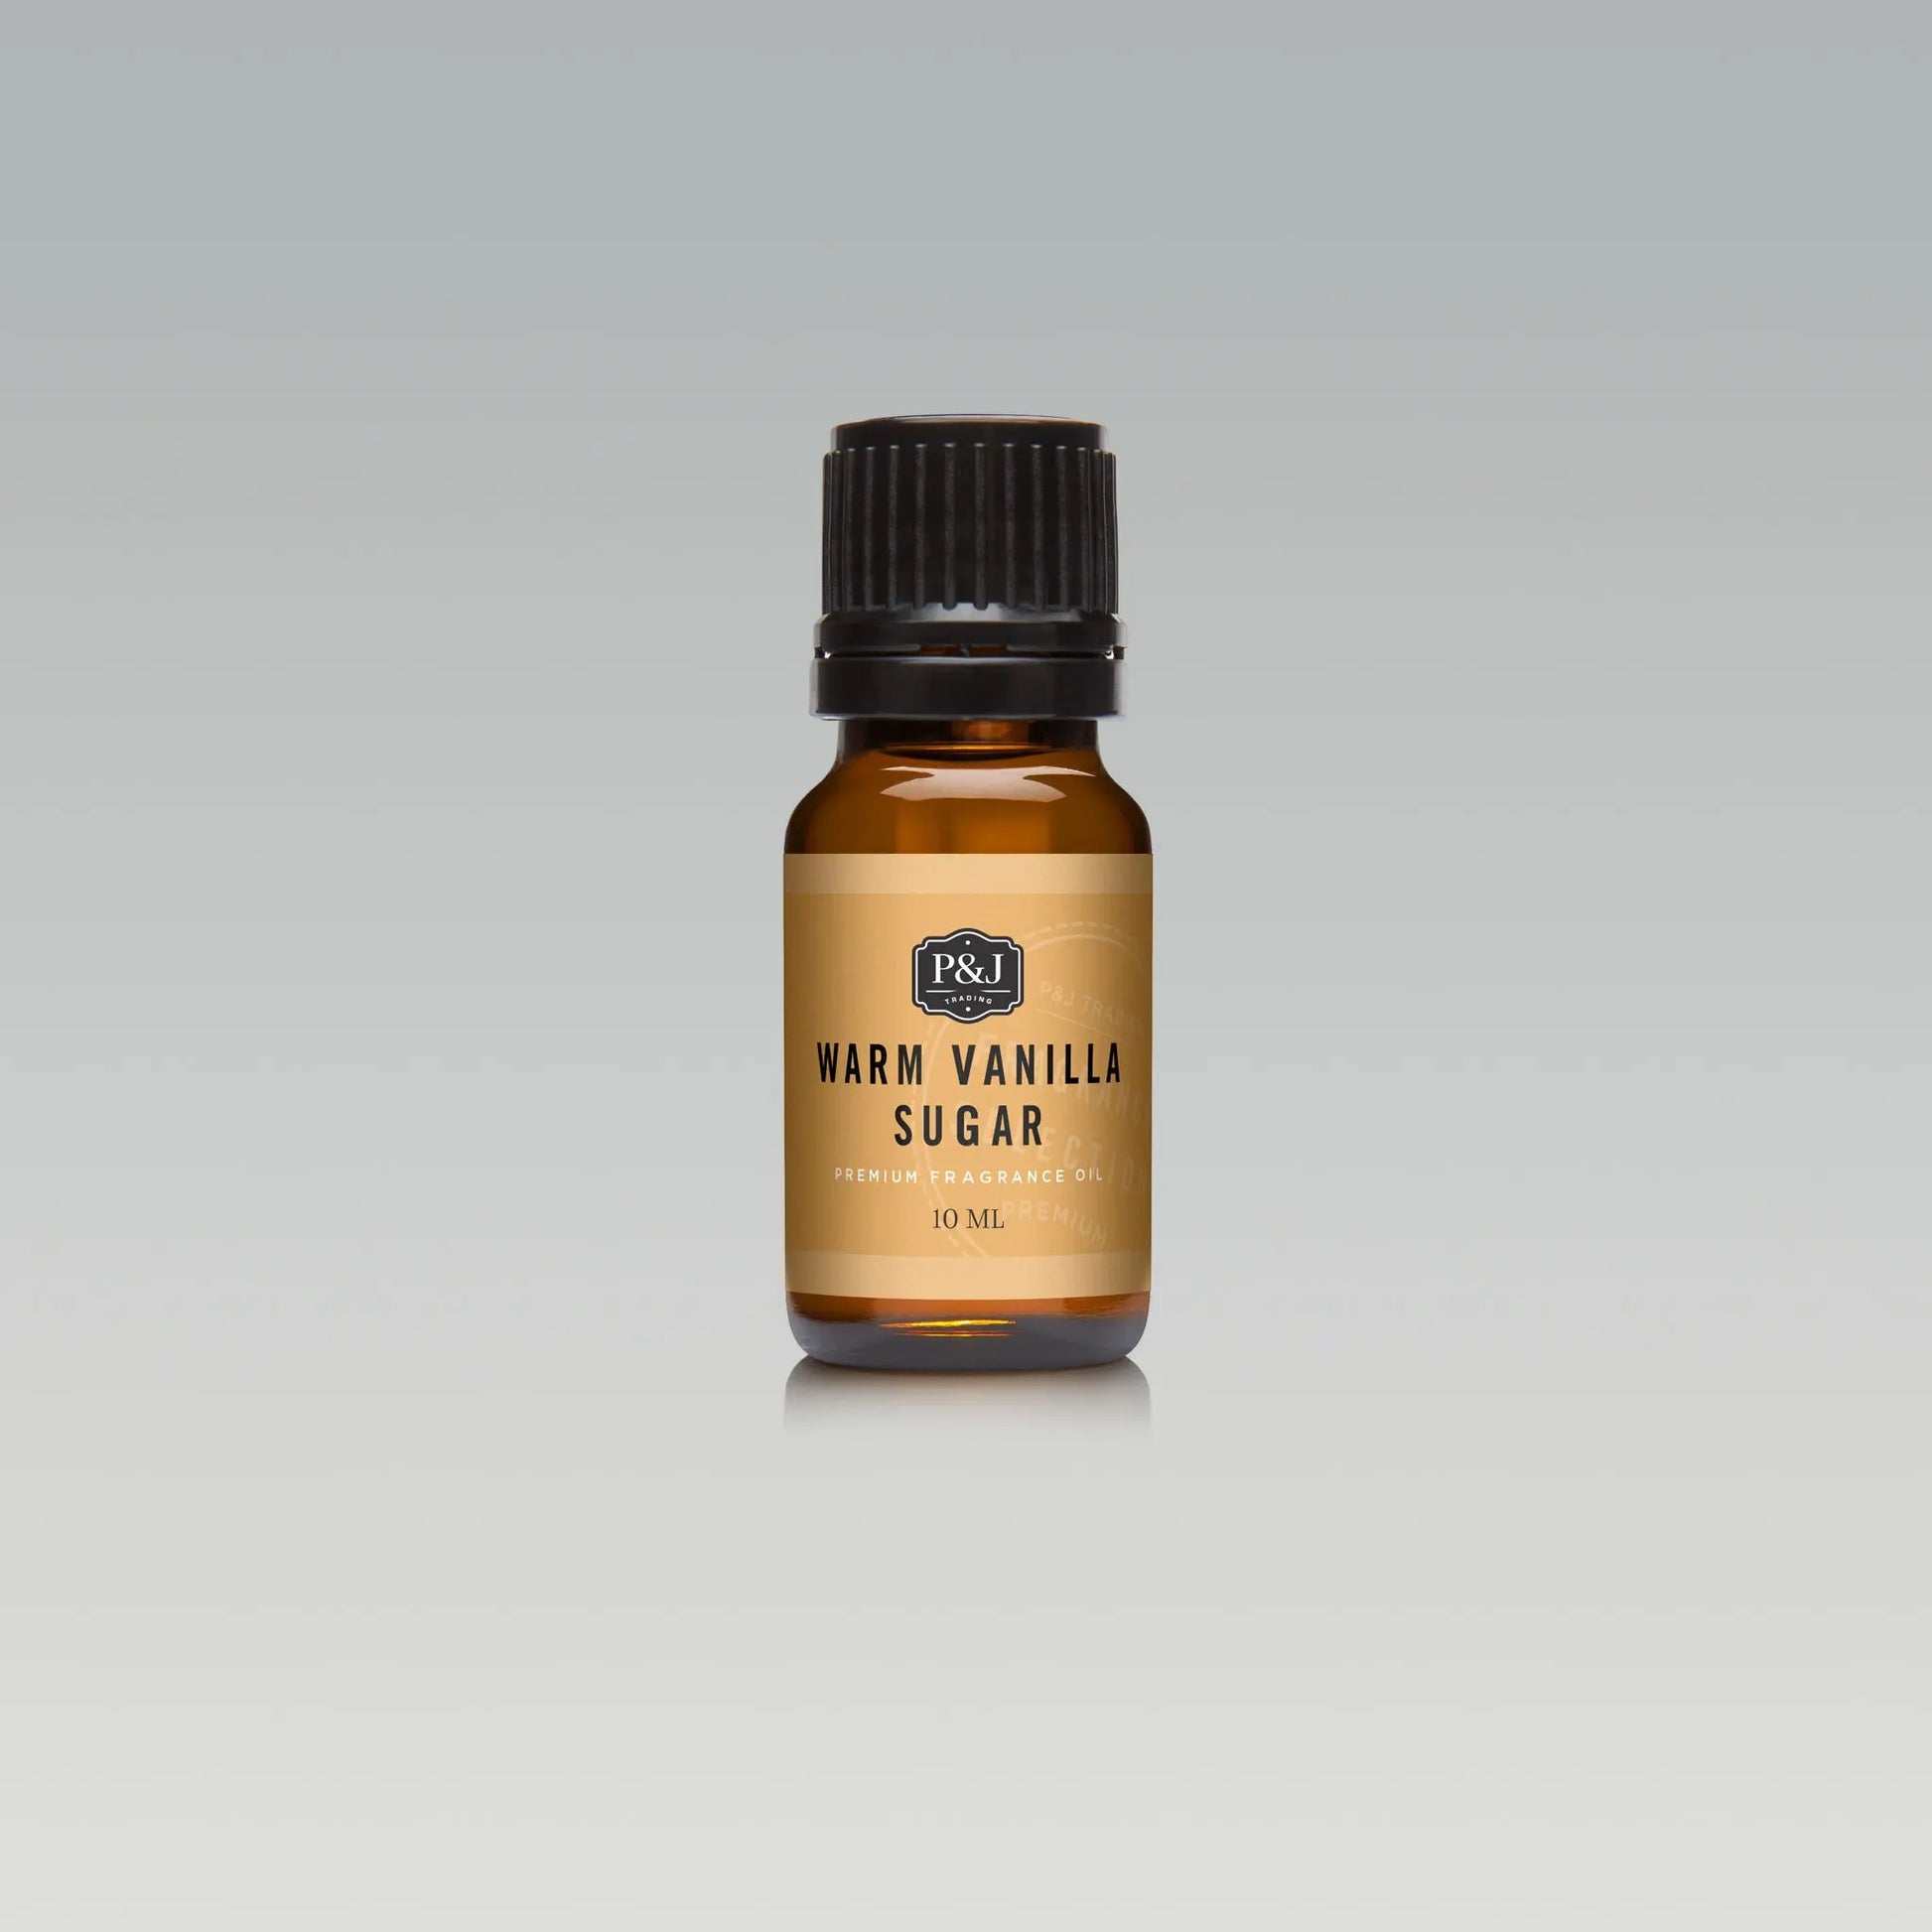 Warm Vanilla Sugar Type Oil - Yummy & sweet, Gourmand Fragrance - Warm and  syrupy, Uncut, Alcohol Free Concentrated Perfumed Oil